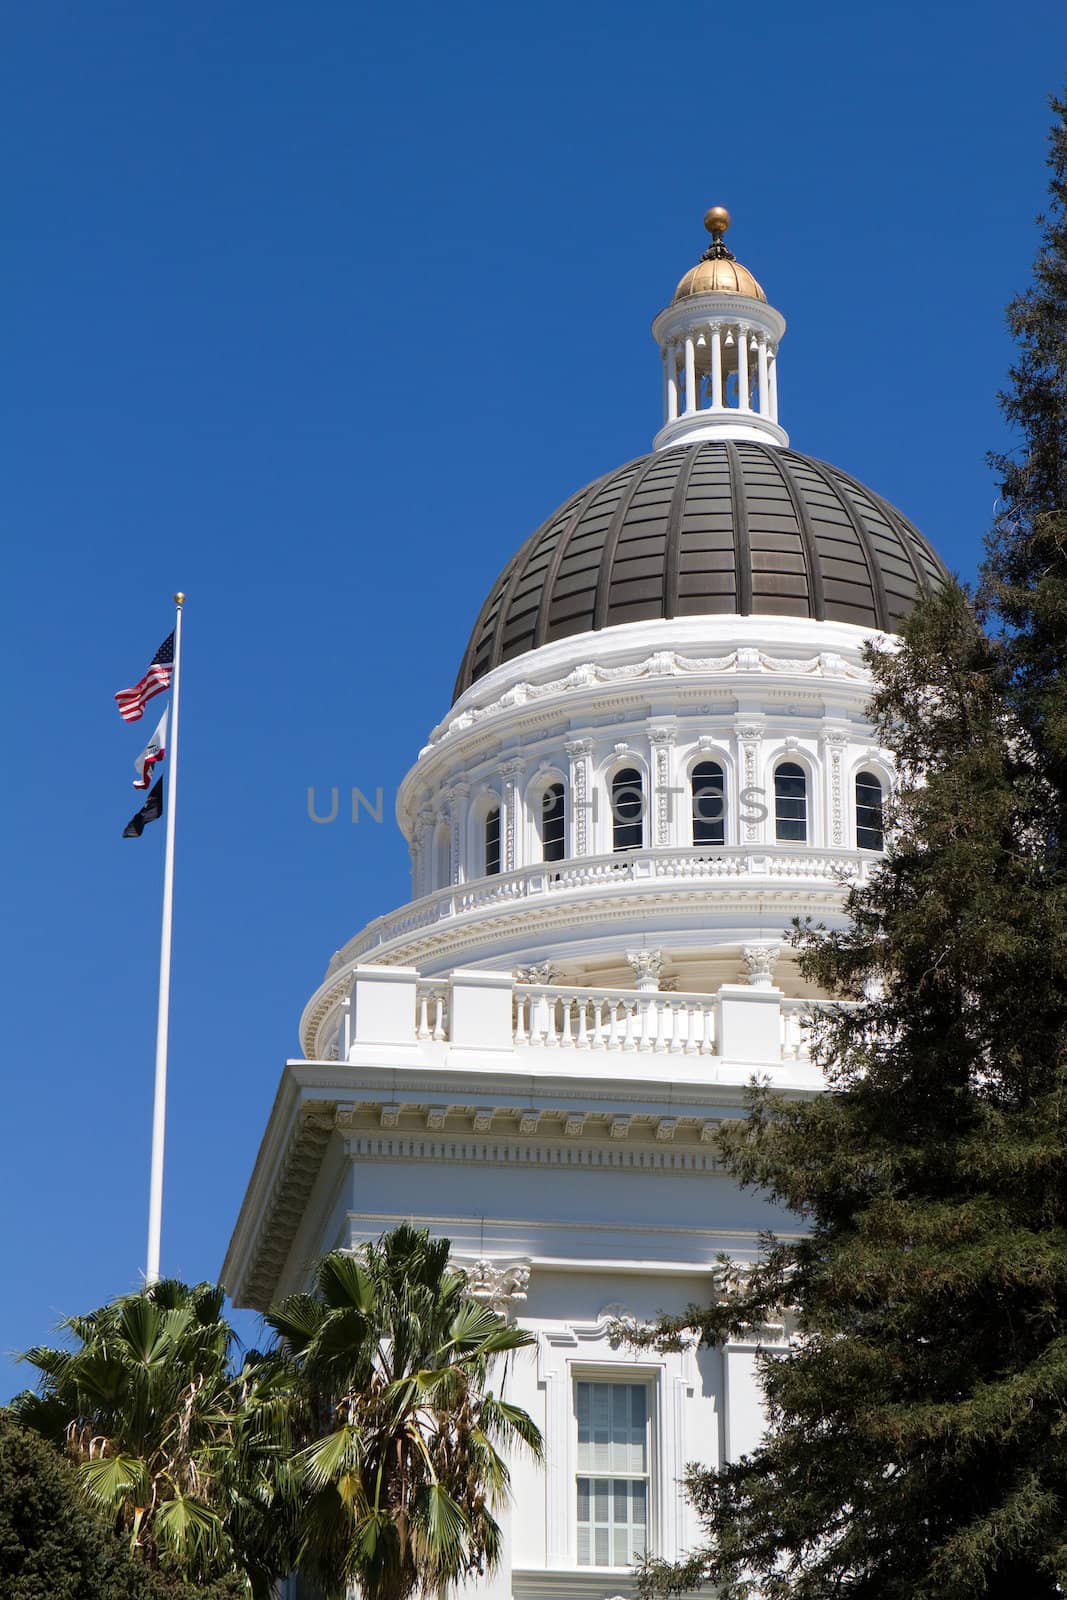 California state capitol dome and flags against a blue sky.